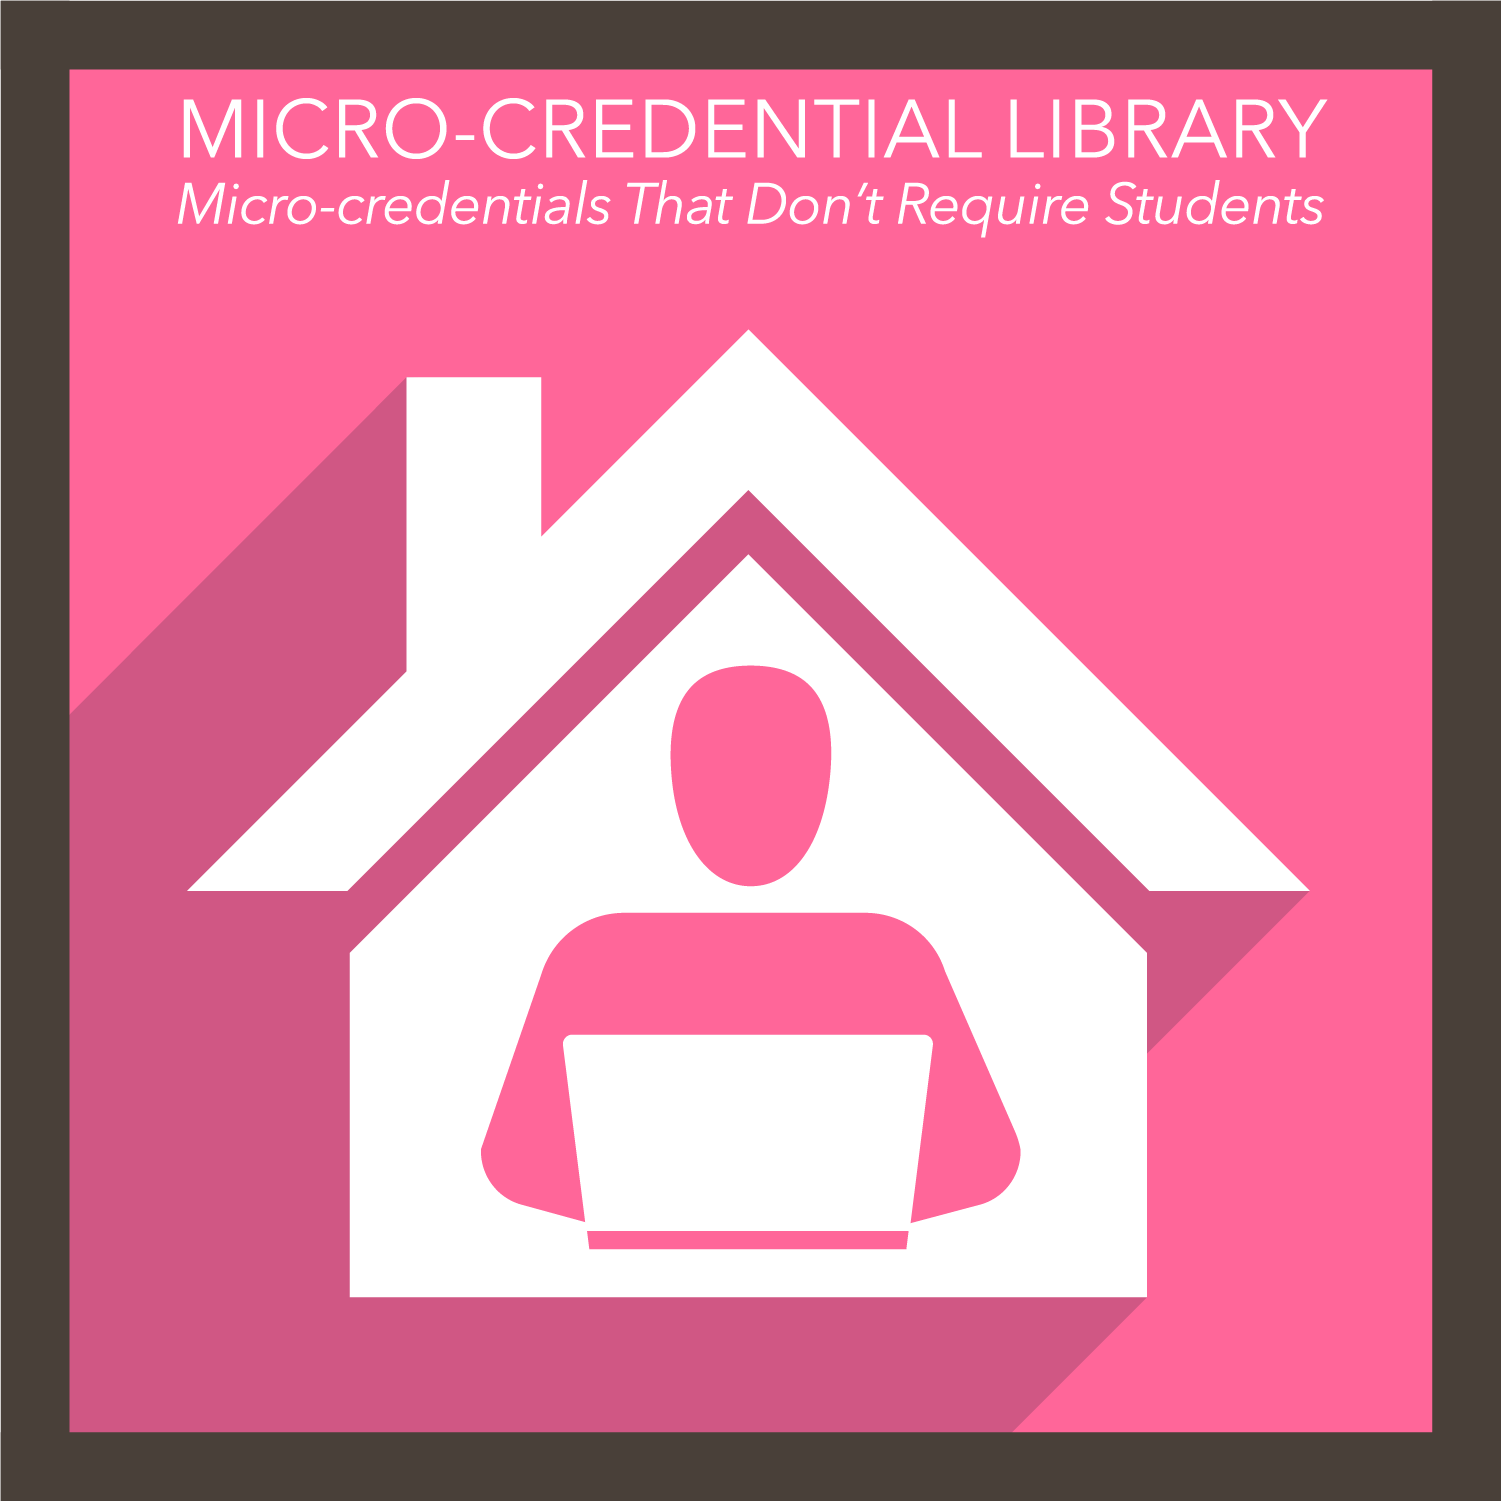 Micro-credentials That Don't Require Students